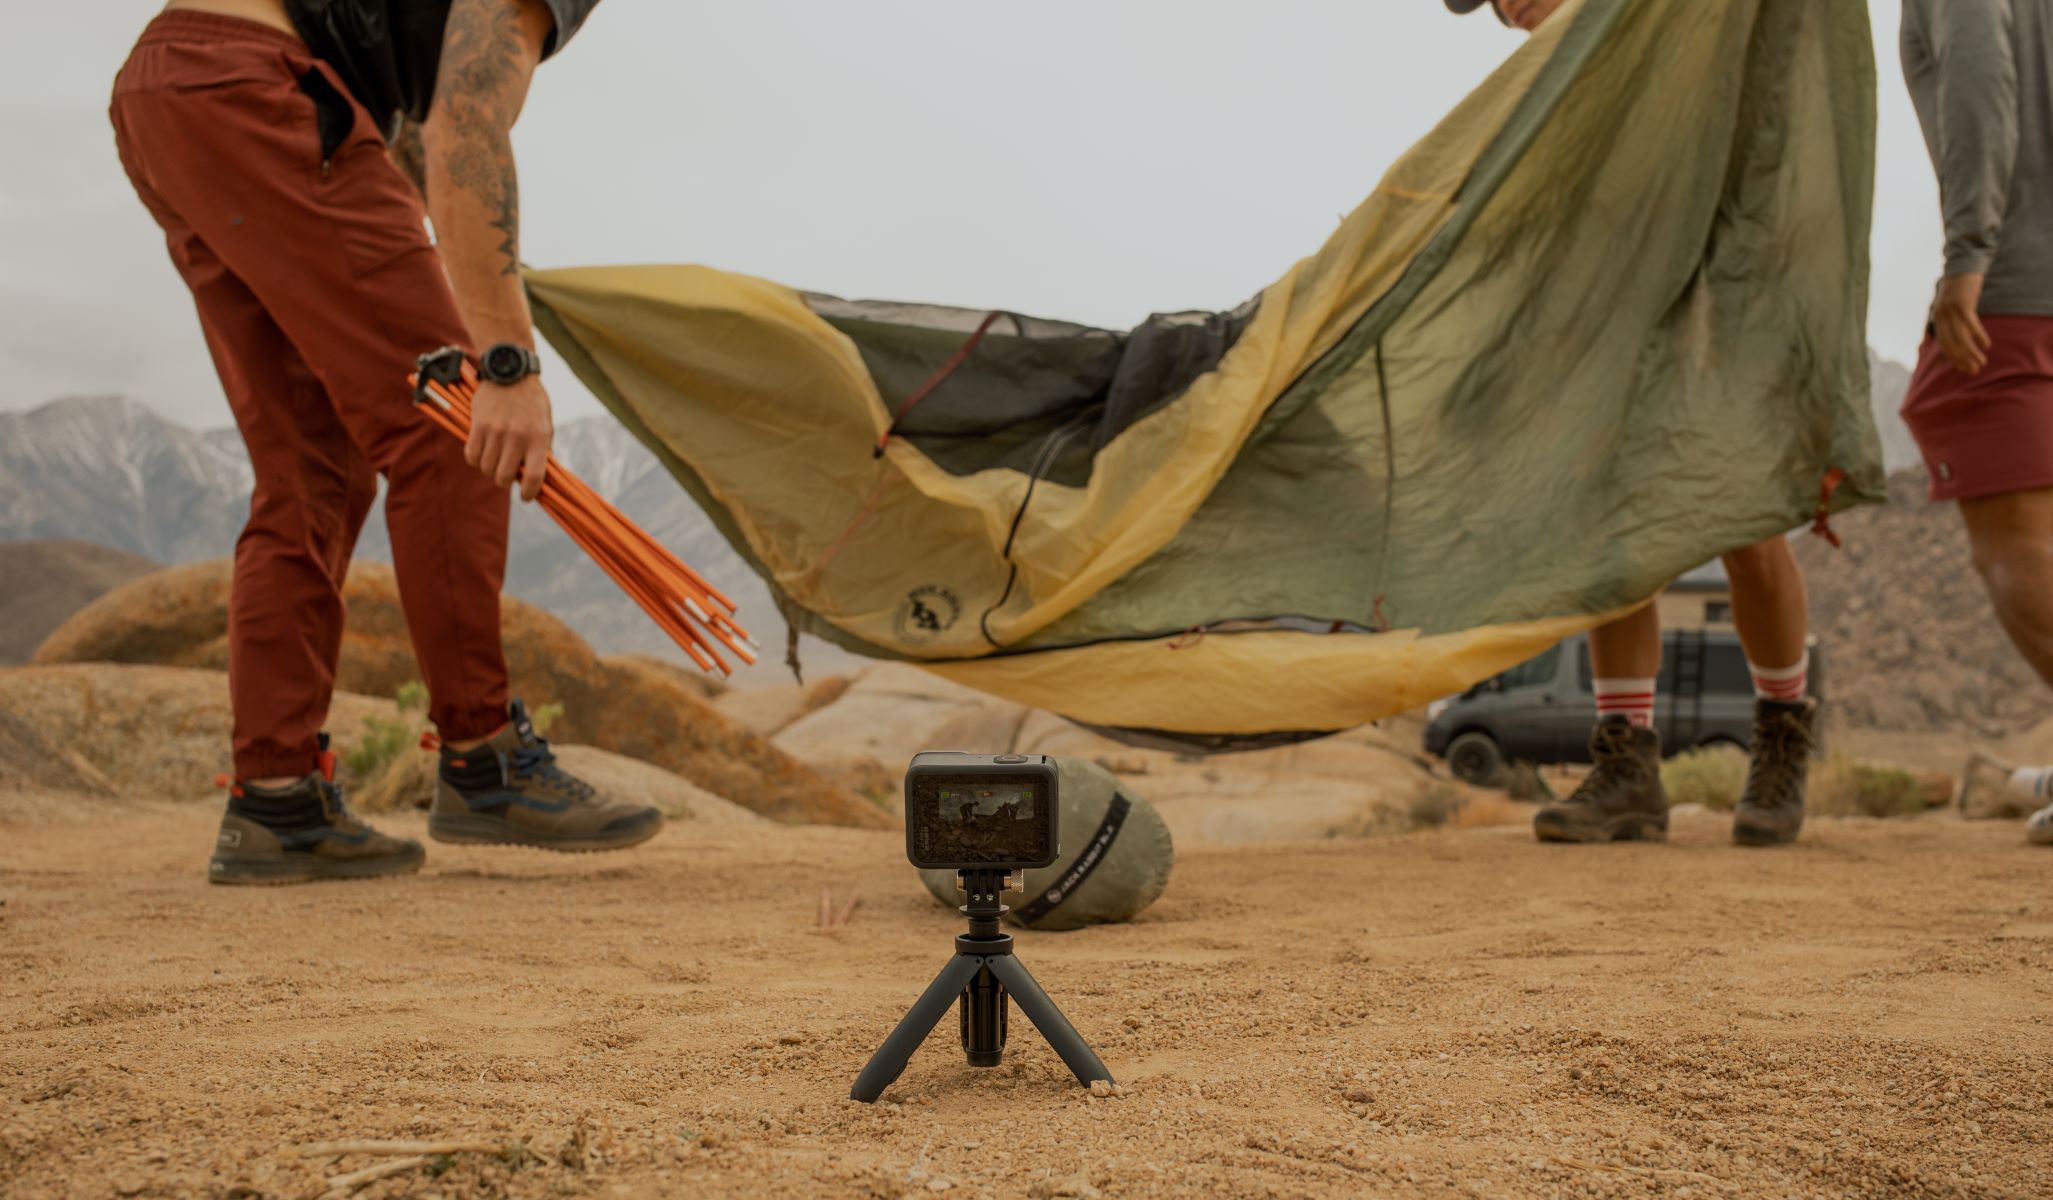 GoPro Stability: Attaching Your GoPro To A Tripod For Steady Shots